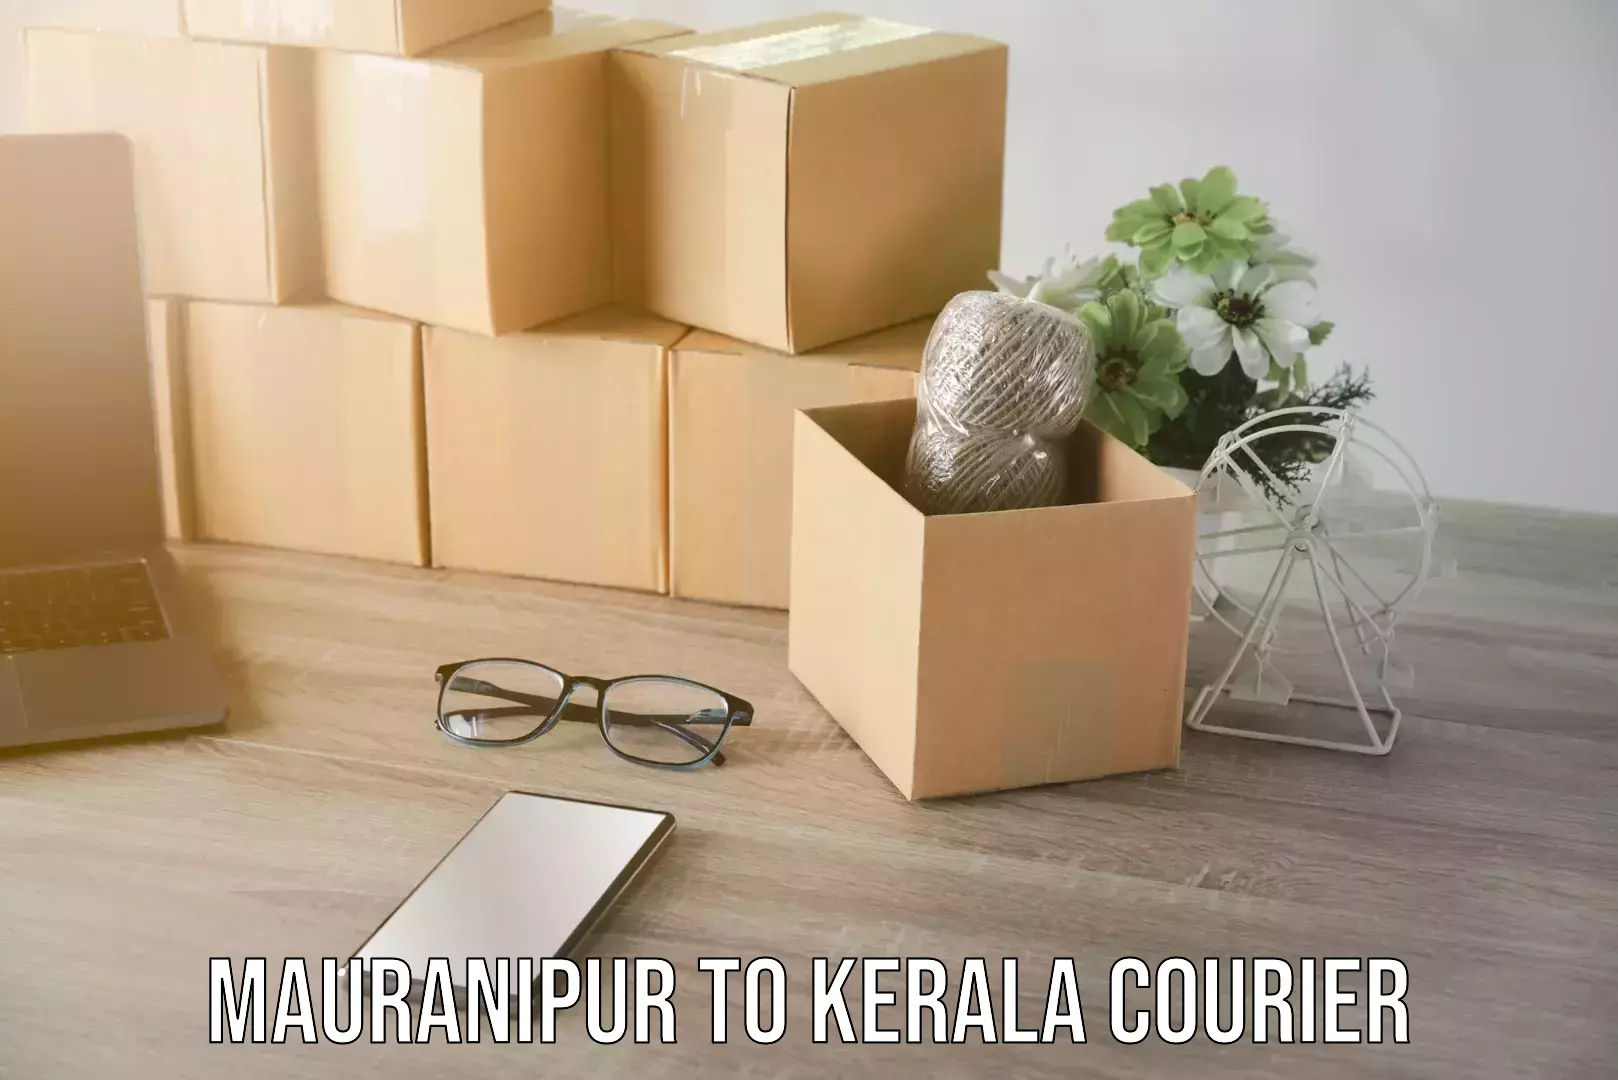 Home moving experts Mauranipur to Kerala